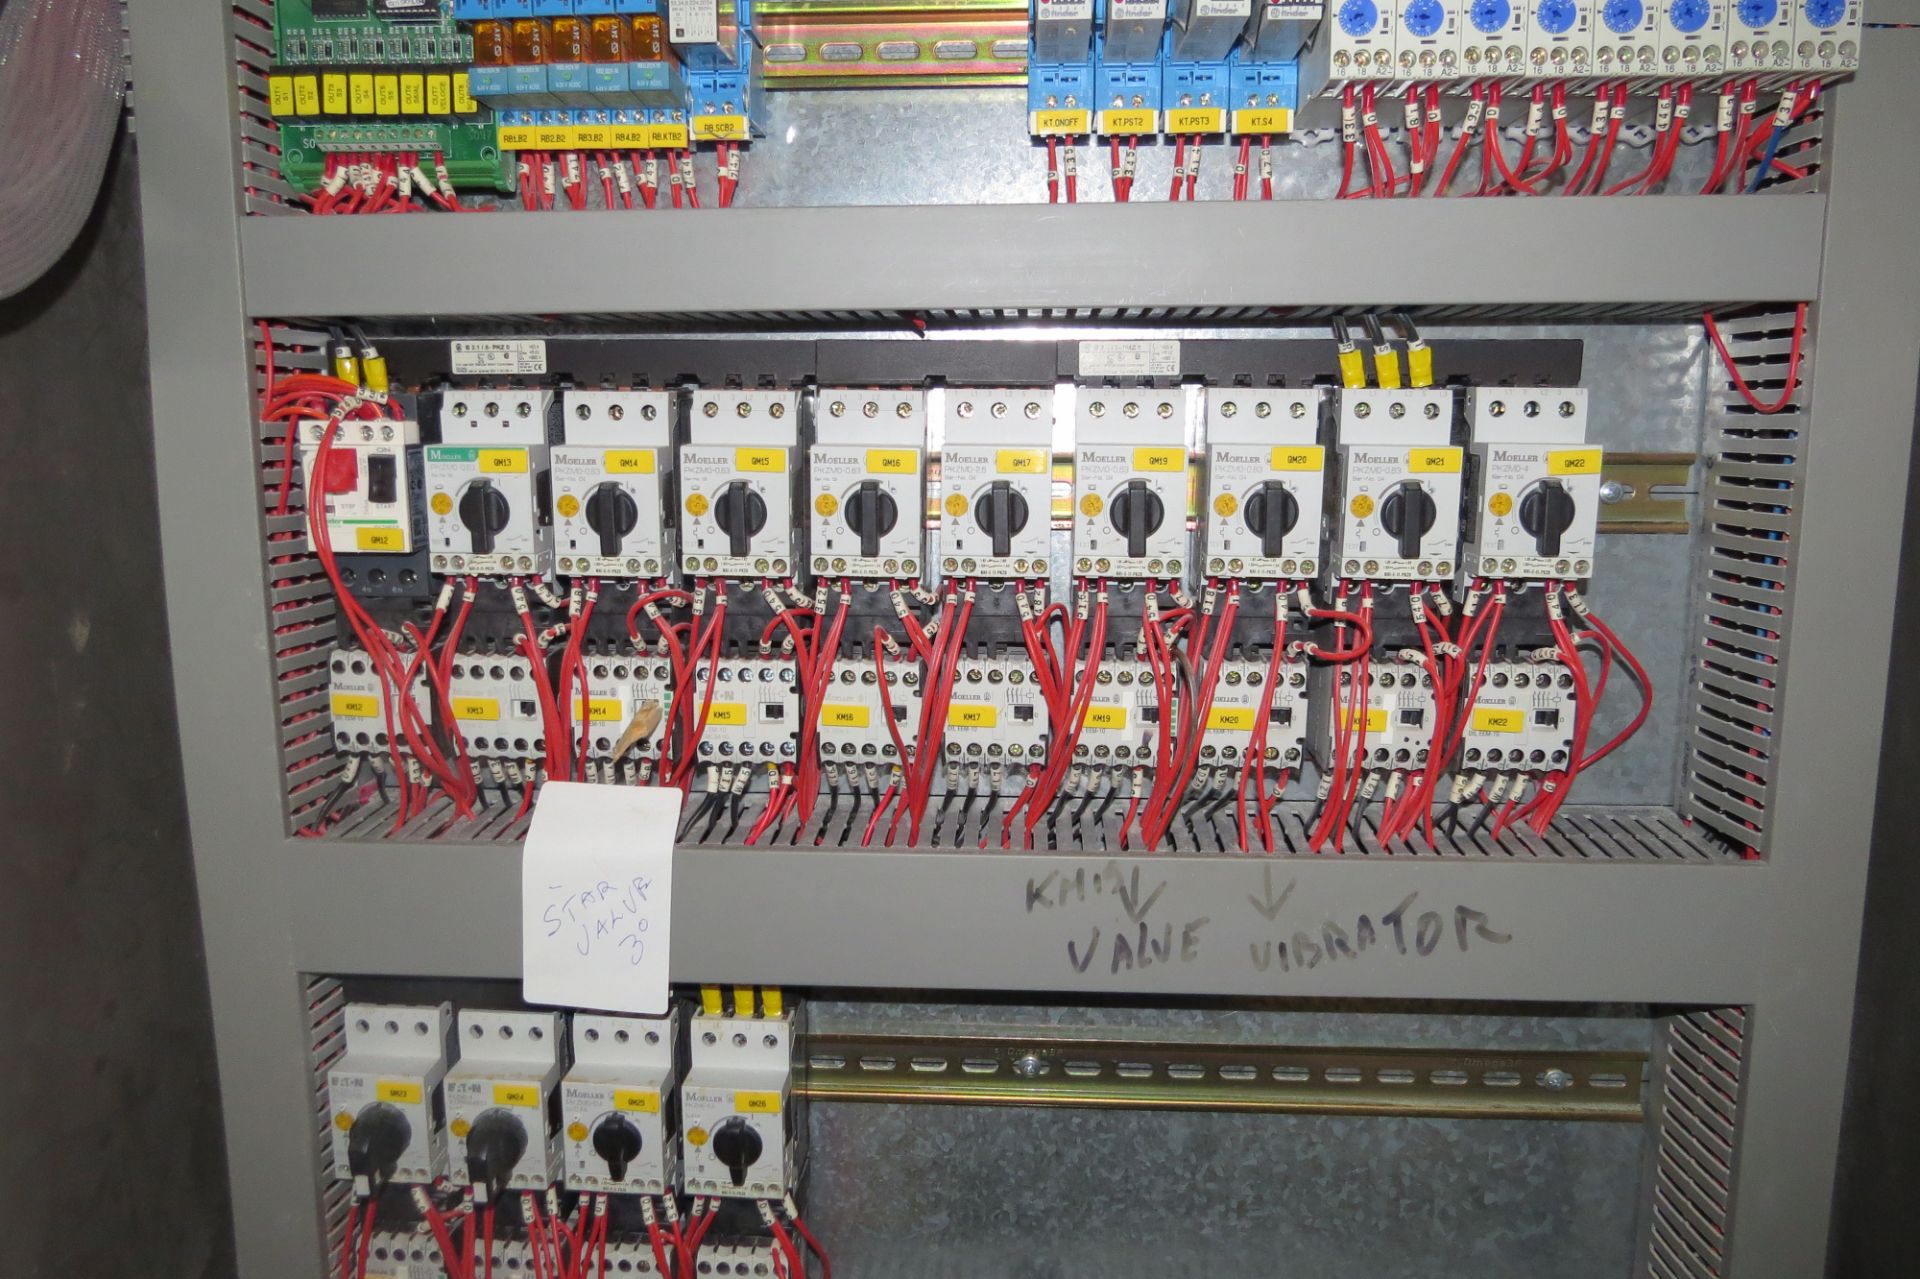 Control Panel for Batch Weighing System and Hopper distribution for lots 4, 6A, 6B, & 6C - Image 4 of 5